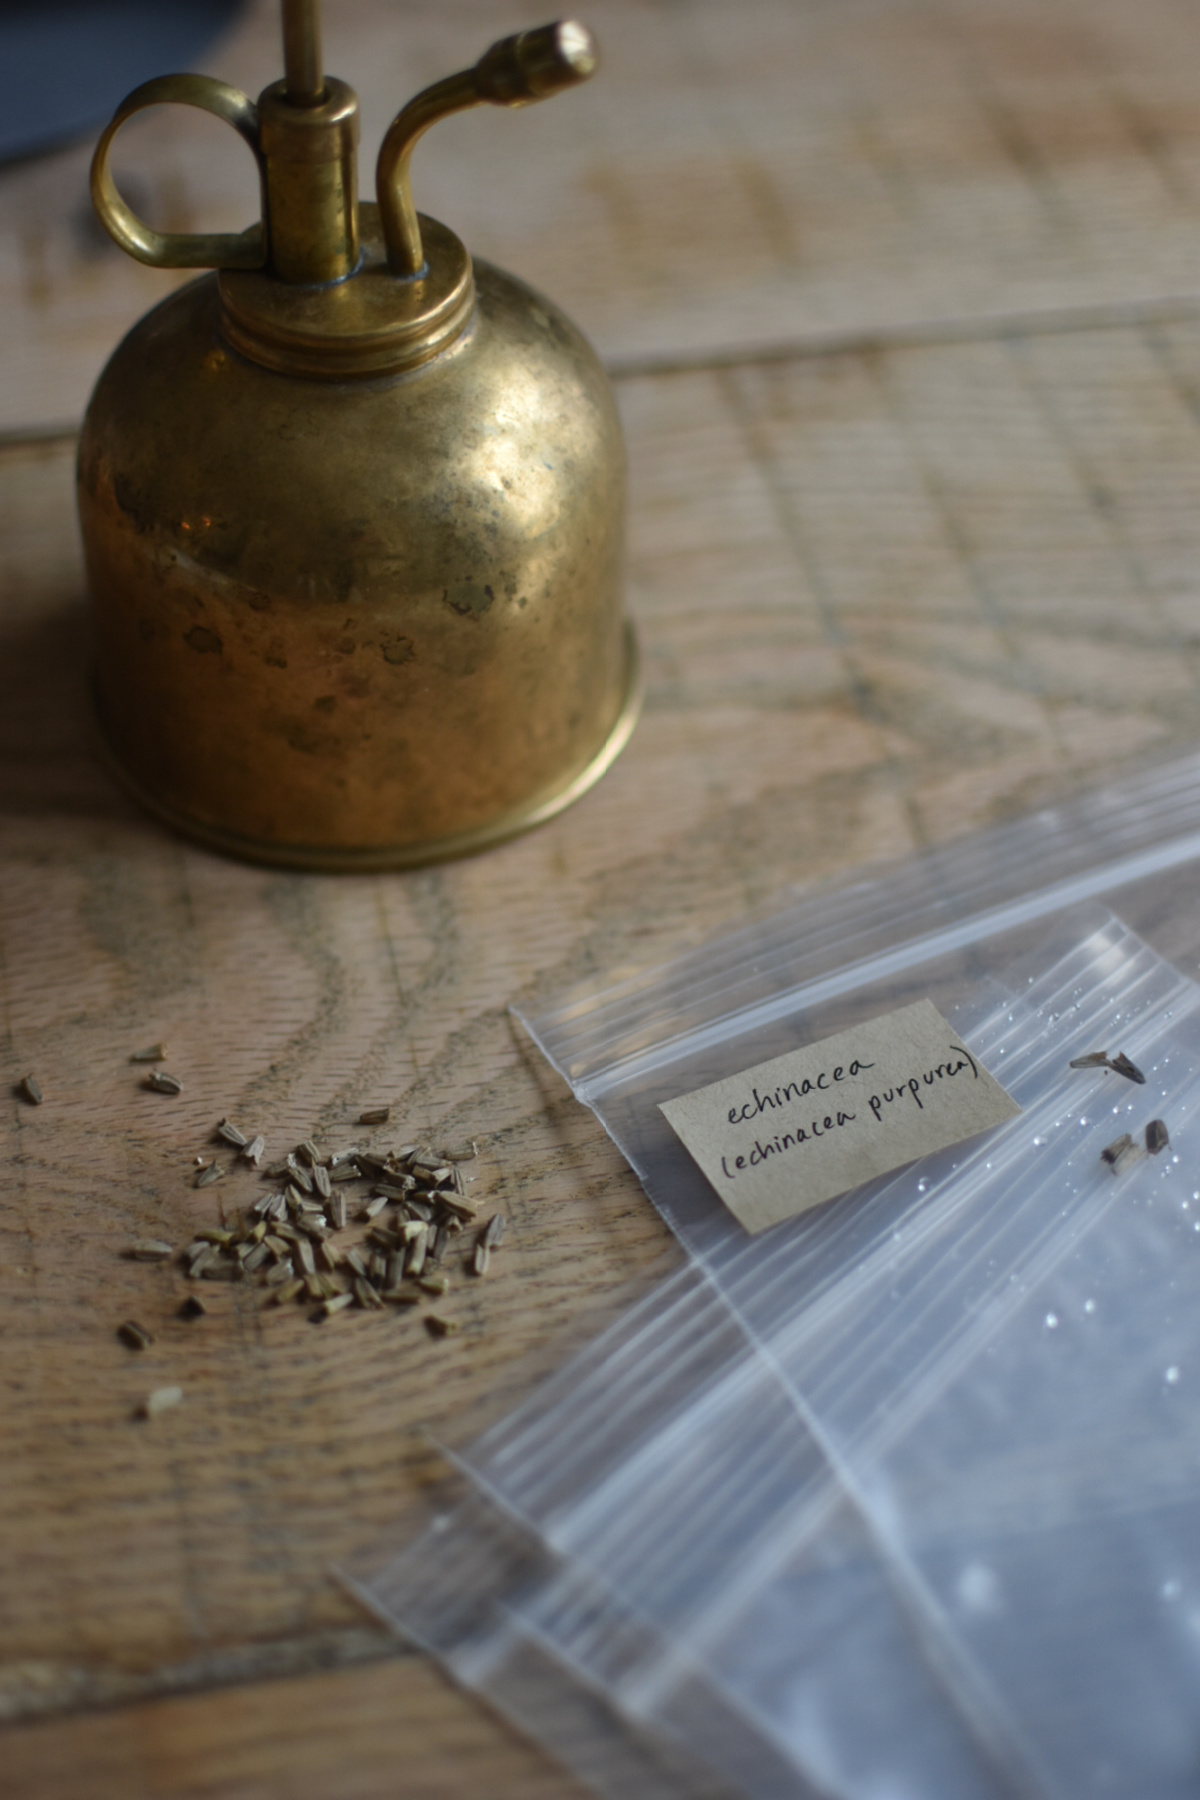 Seeds on a table ready for seed soaking